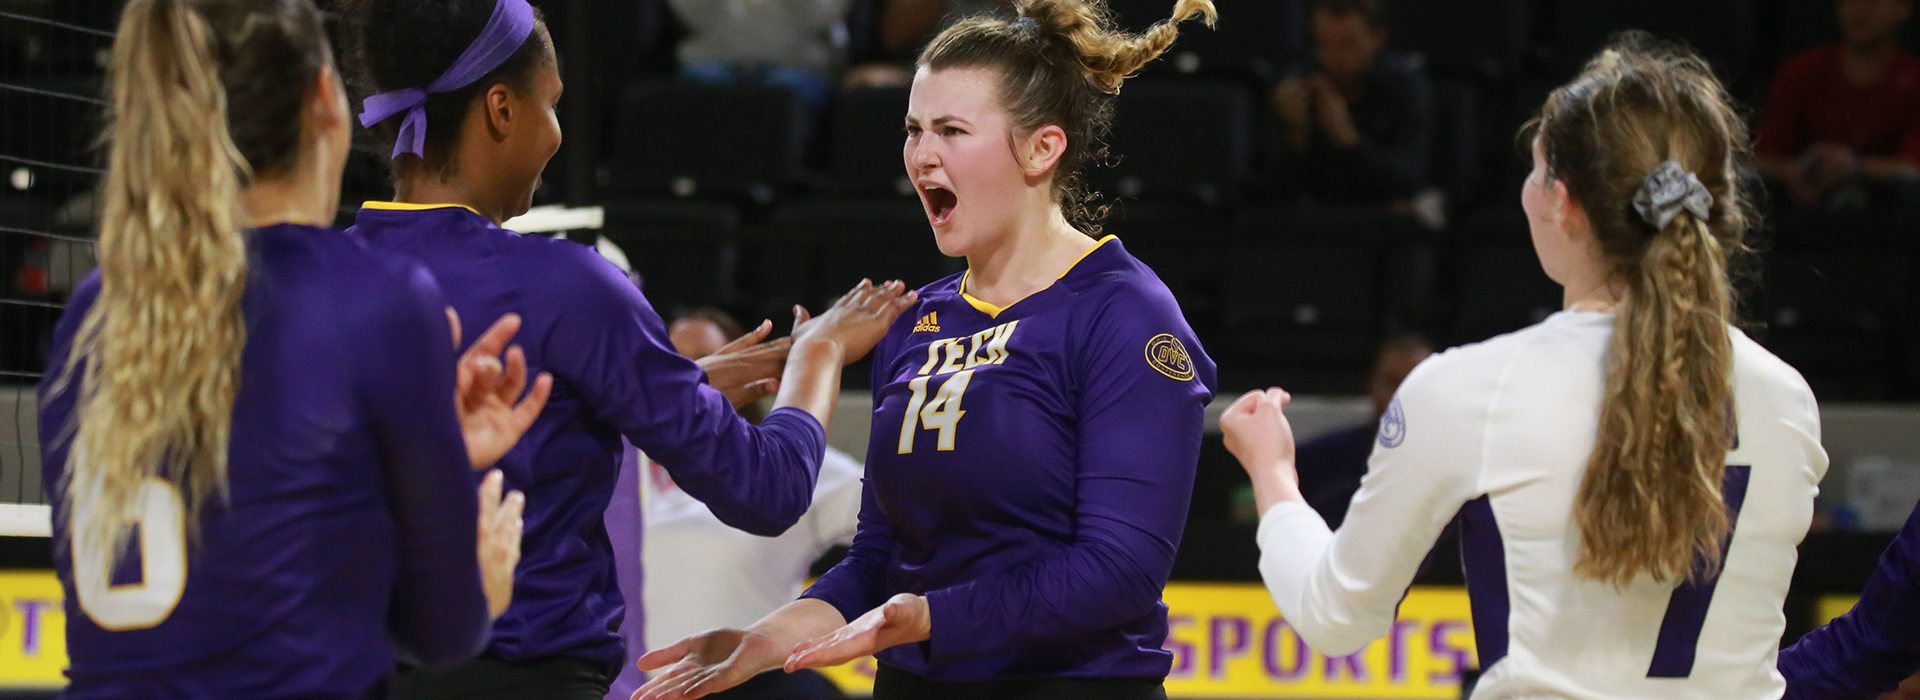 2020-21 OVC volleyball schedule altered